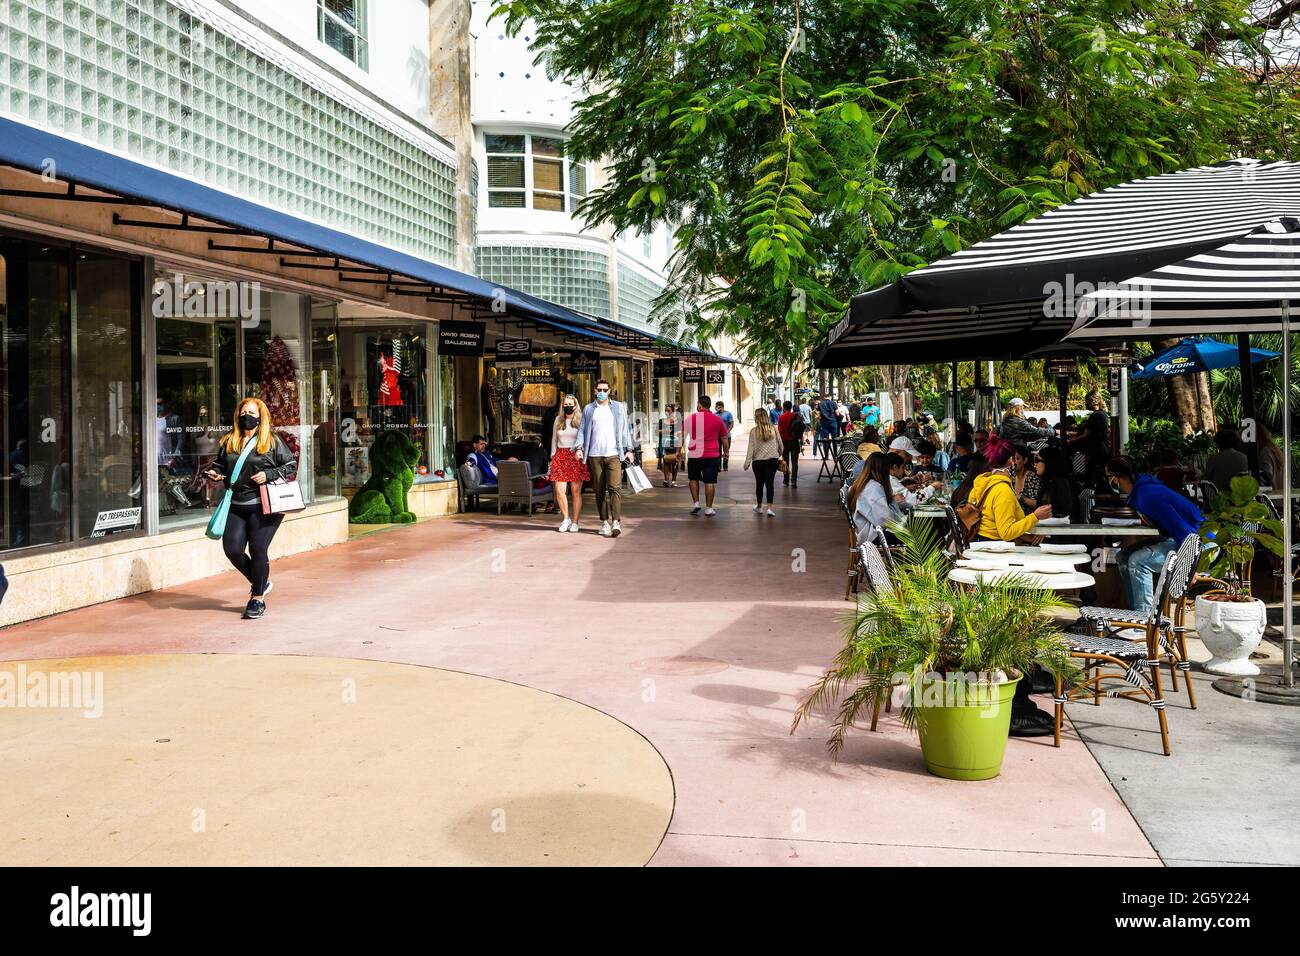 Miami Beach, USA - January 17, 2021: Famous Lincoln road shopping street with people walking on sidewalk by restaurant cafe outdoor dining chairs on s Stock Photo